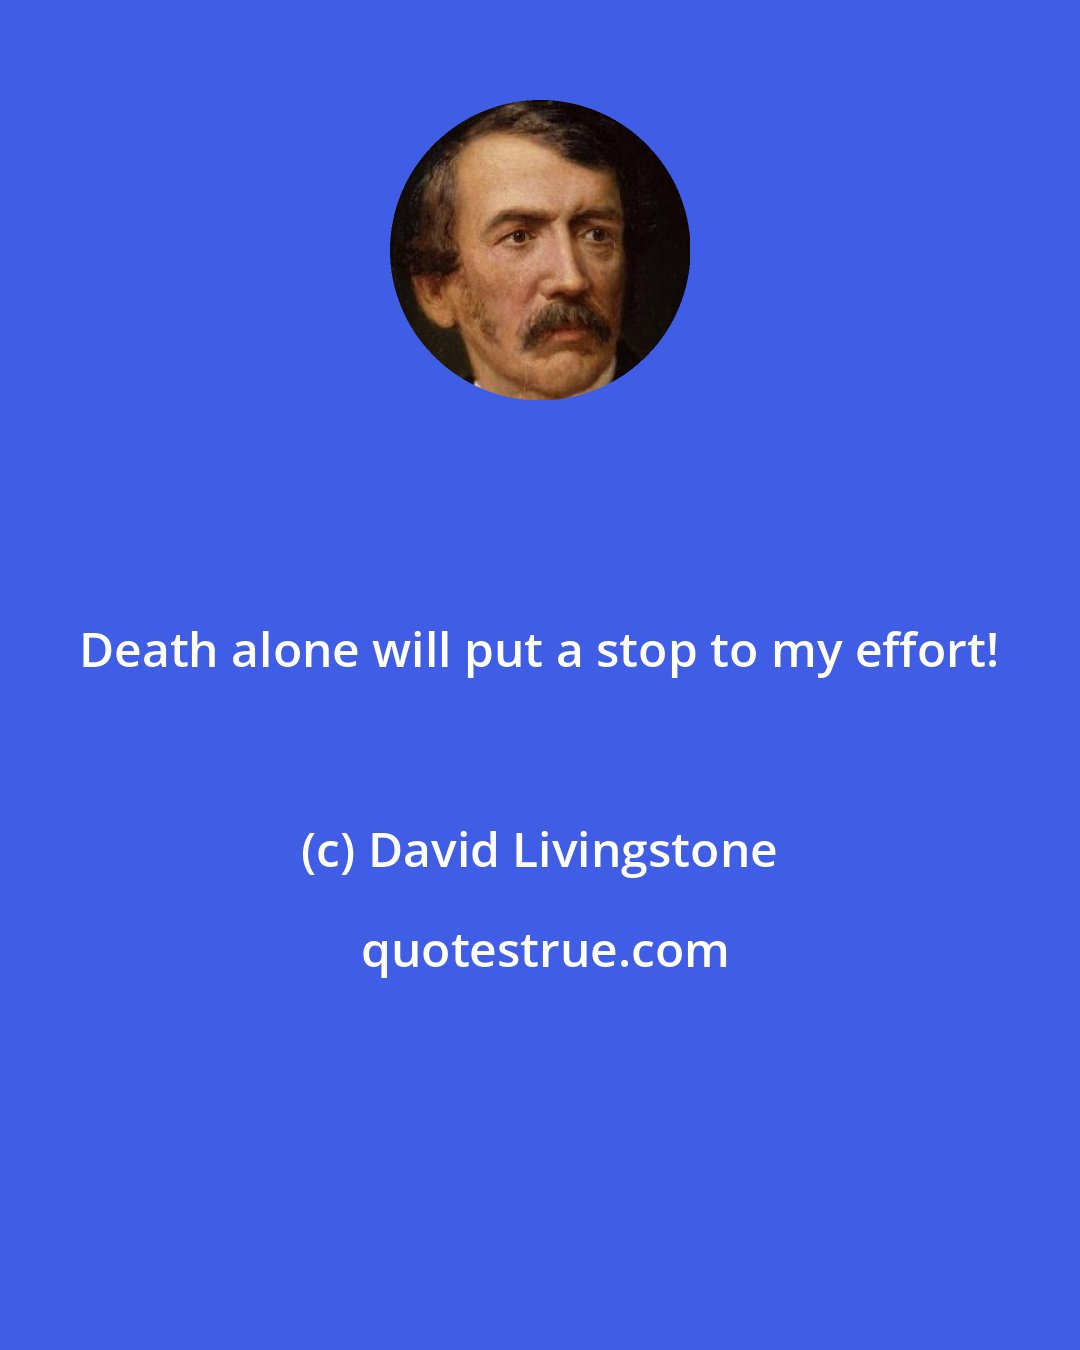 David Livingstone: Death alone will put a stop to my effort!